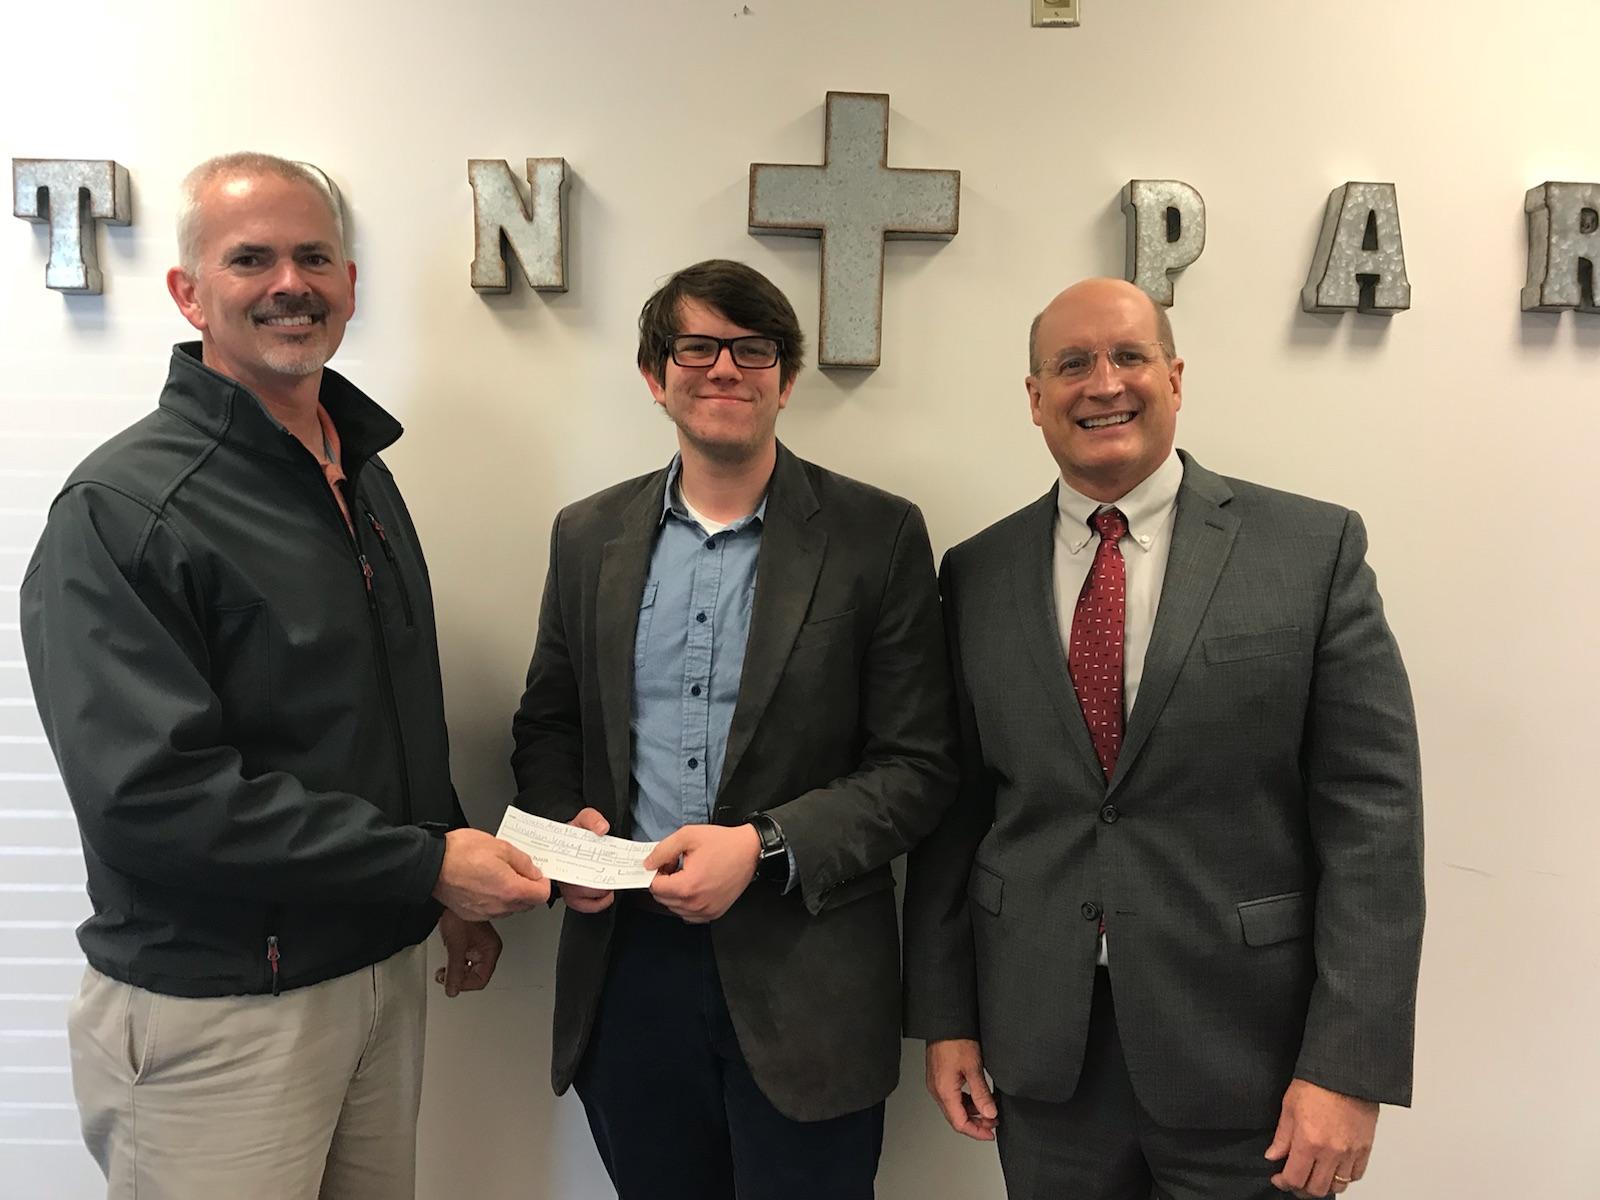 From left, Clint Hutcheson, Director of Mercy Ministries, presents a $1000 ministerial scholarship to Jonathan Jenkins, a Brewton-Parker Christian Studies student while Dr. Steve Echols, president of Brewton-Parker, stands nearby. (Photo credit: Laura Hay)